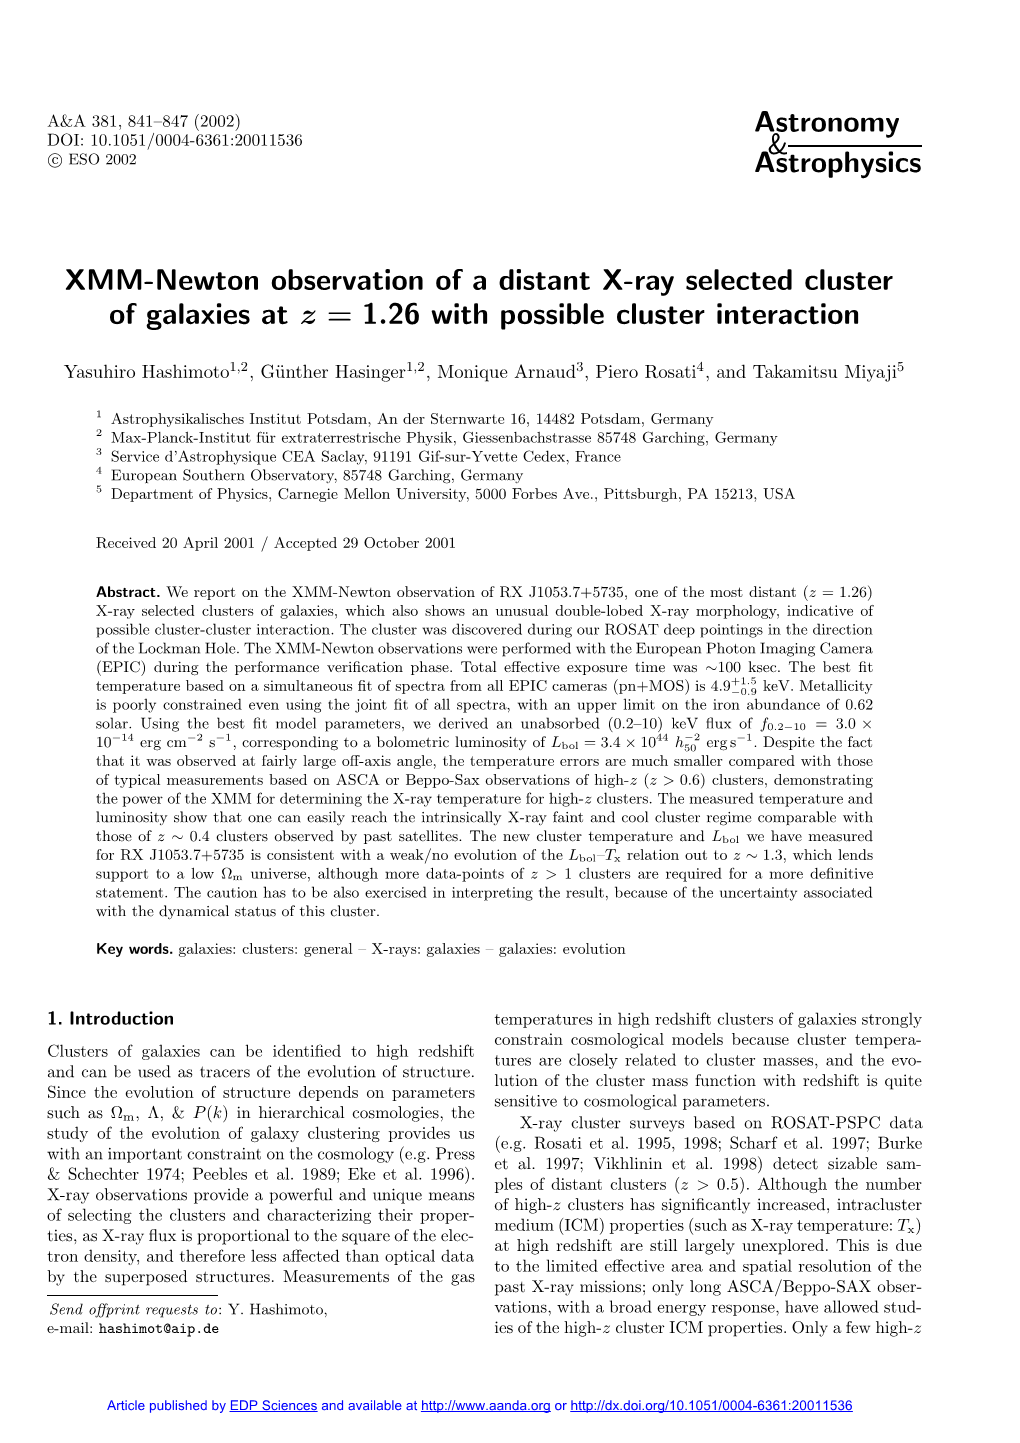 XMM-Newton Observation of a Distant X-Ray Selected Cluster of Galaxies at Z = 1.26 with Possible Cluster Interaction